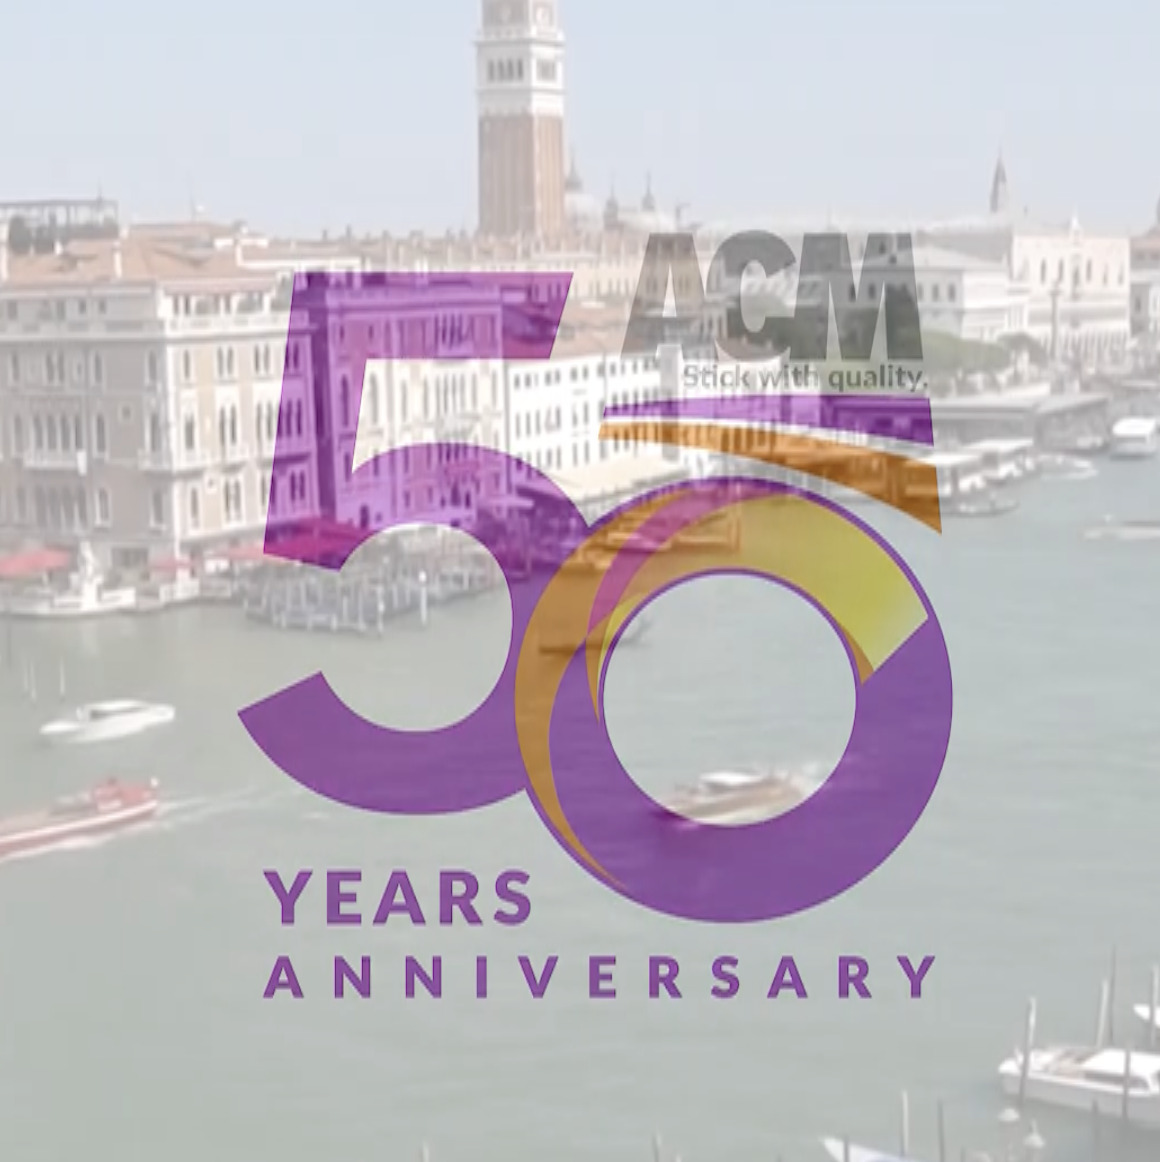 We are thrilled to have celebrated 50 years of ACM Italy in Venice!